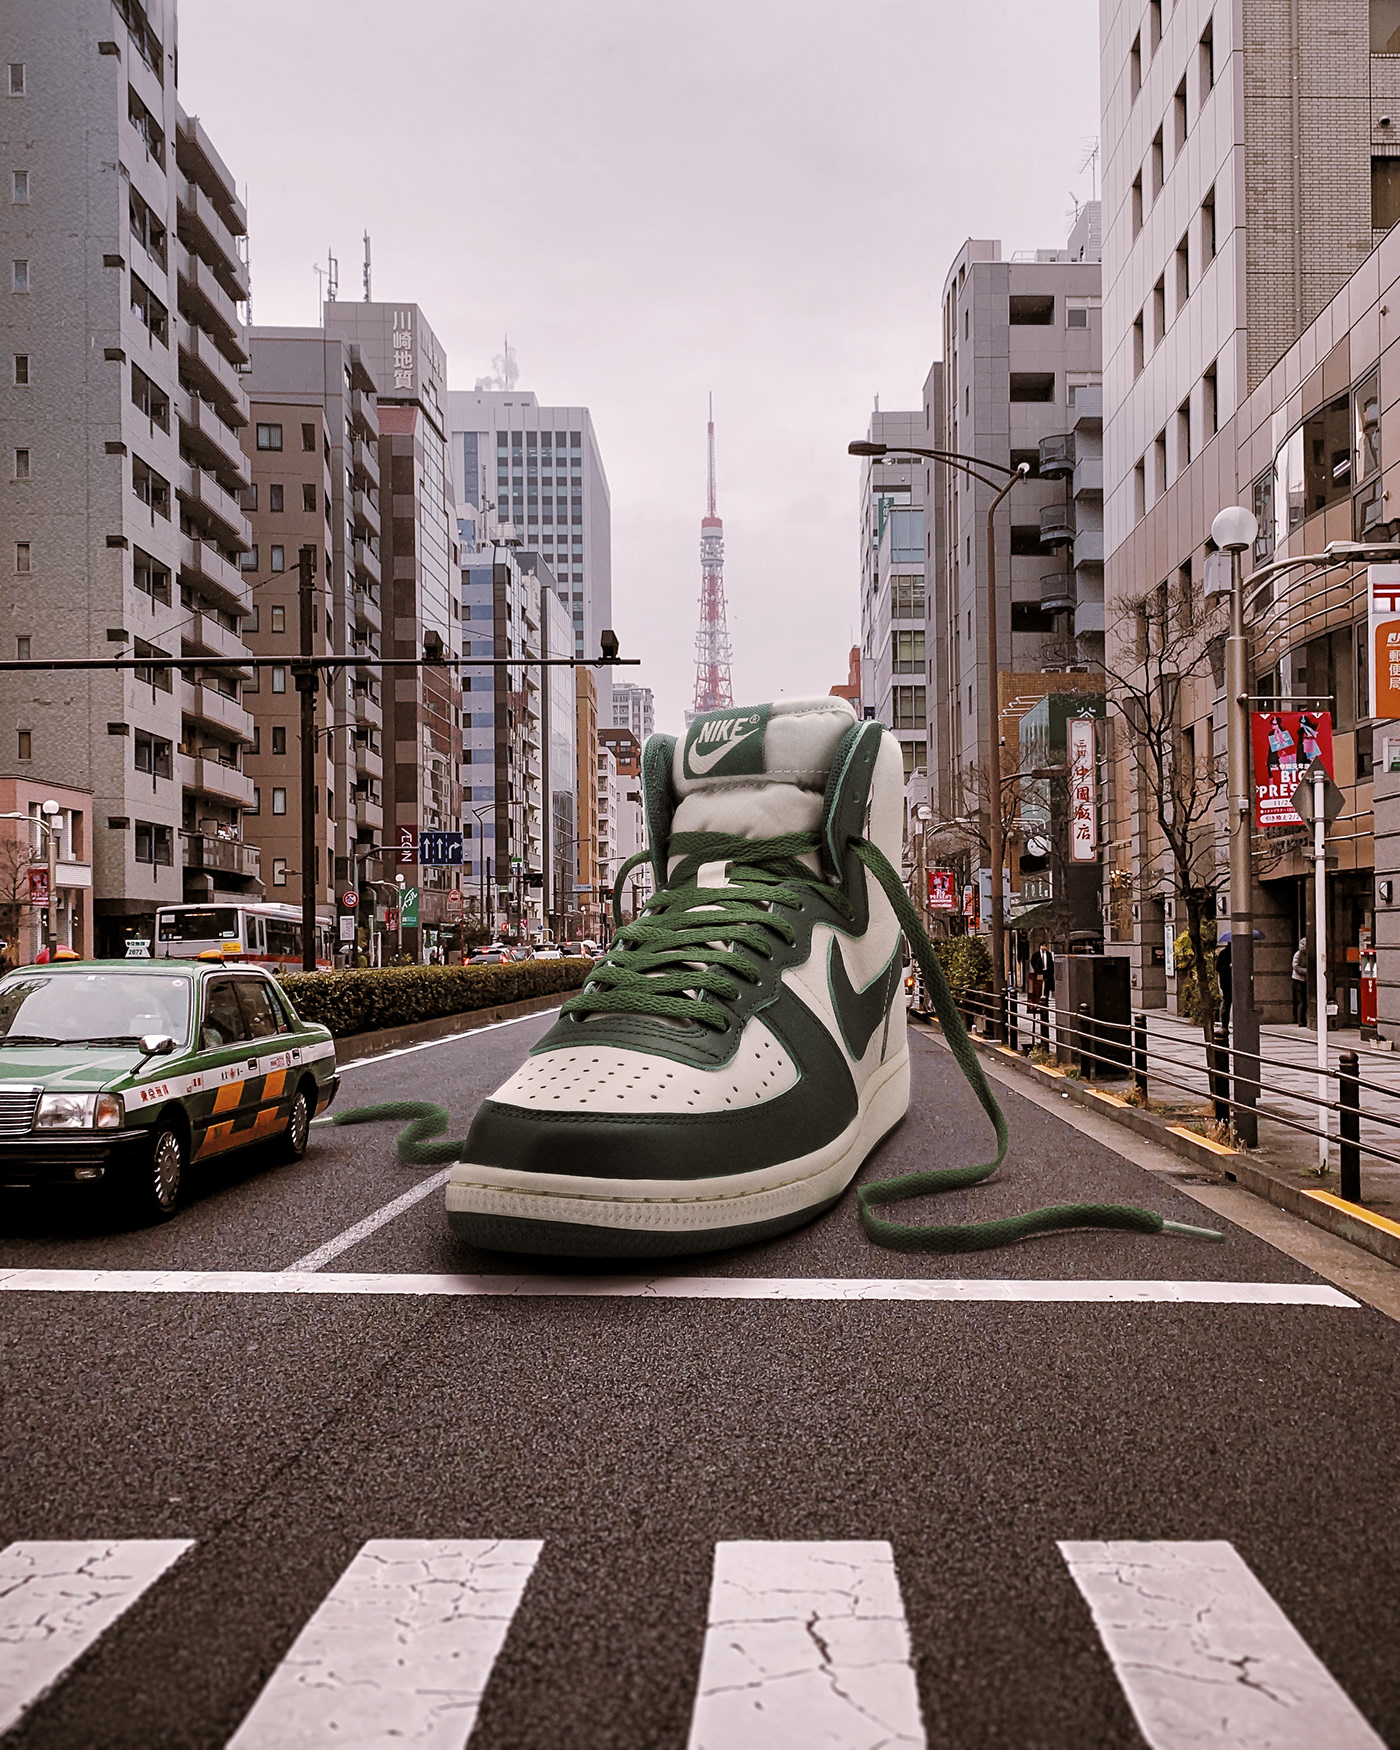 Giant sneaker photo composite in Tokyo. Retouching using Photoshop